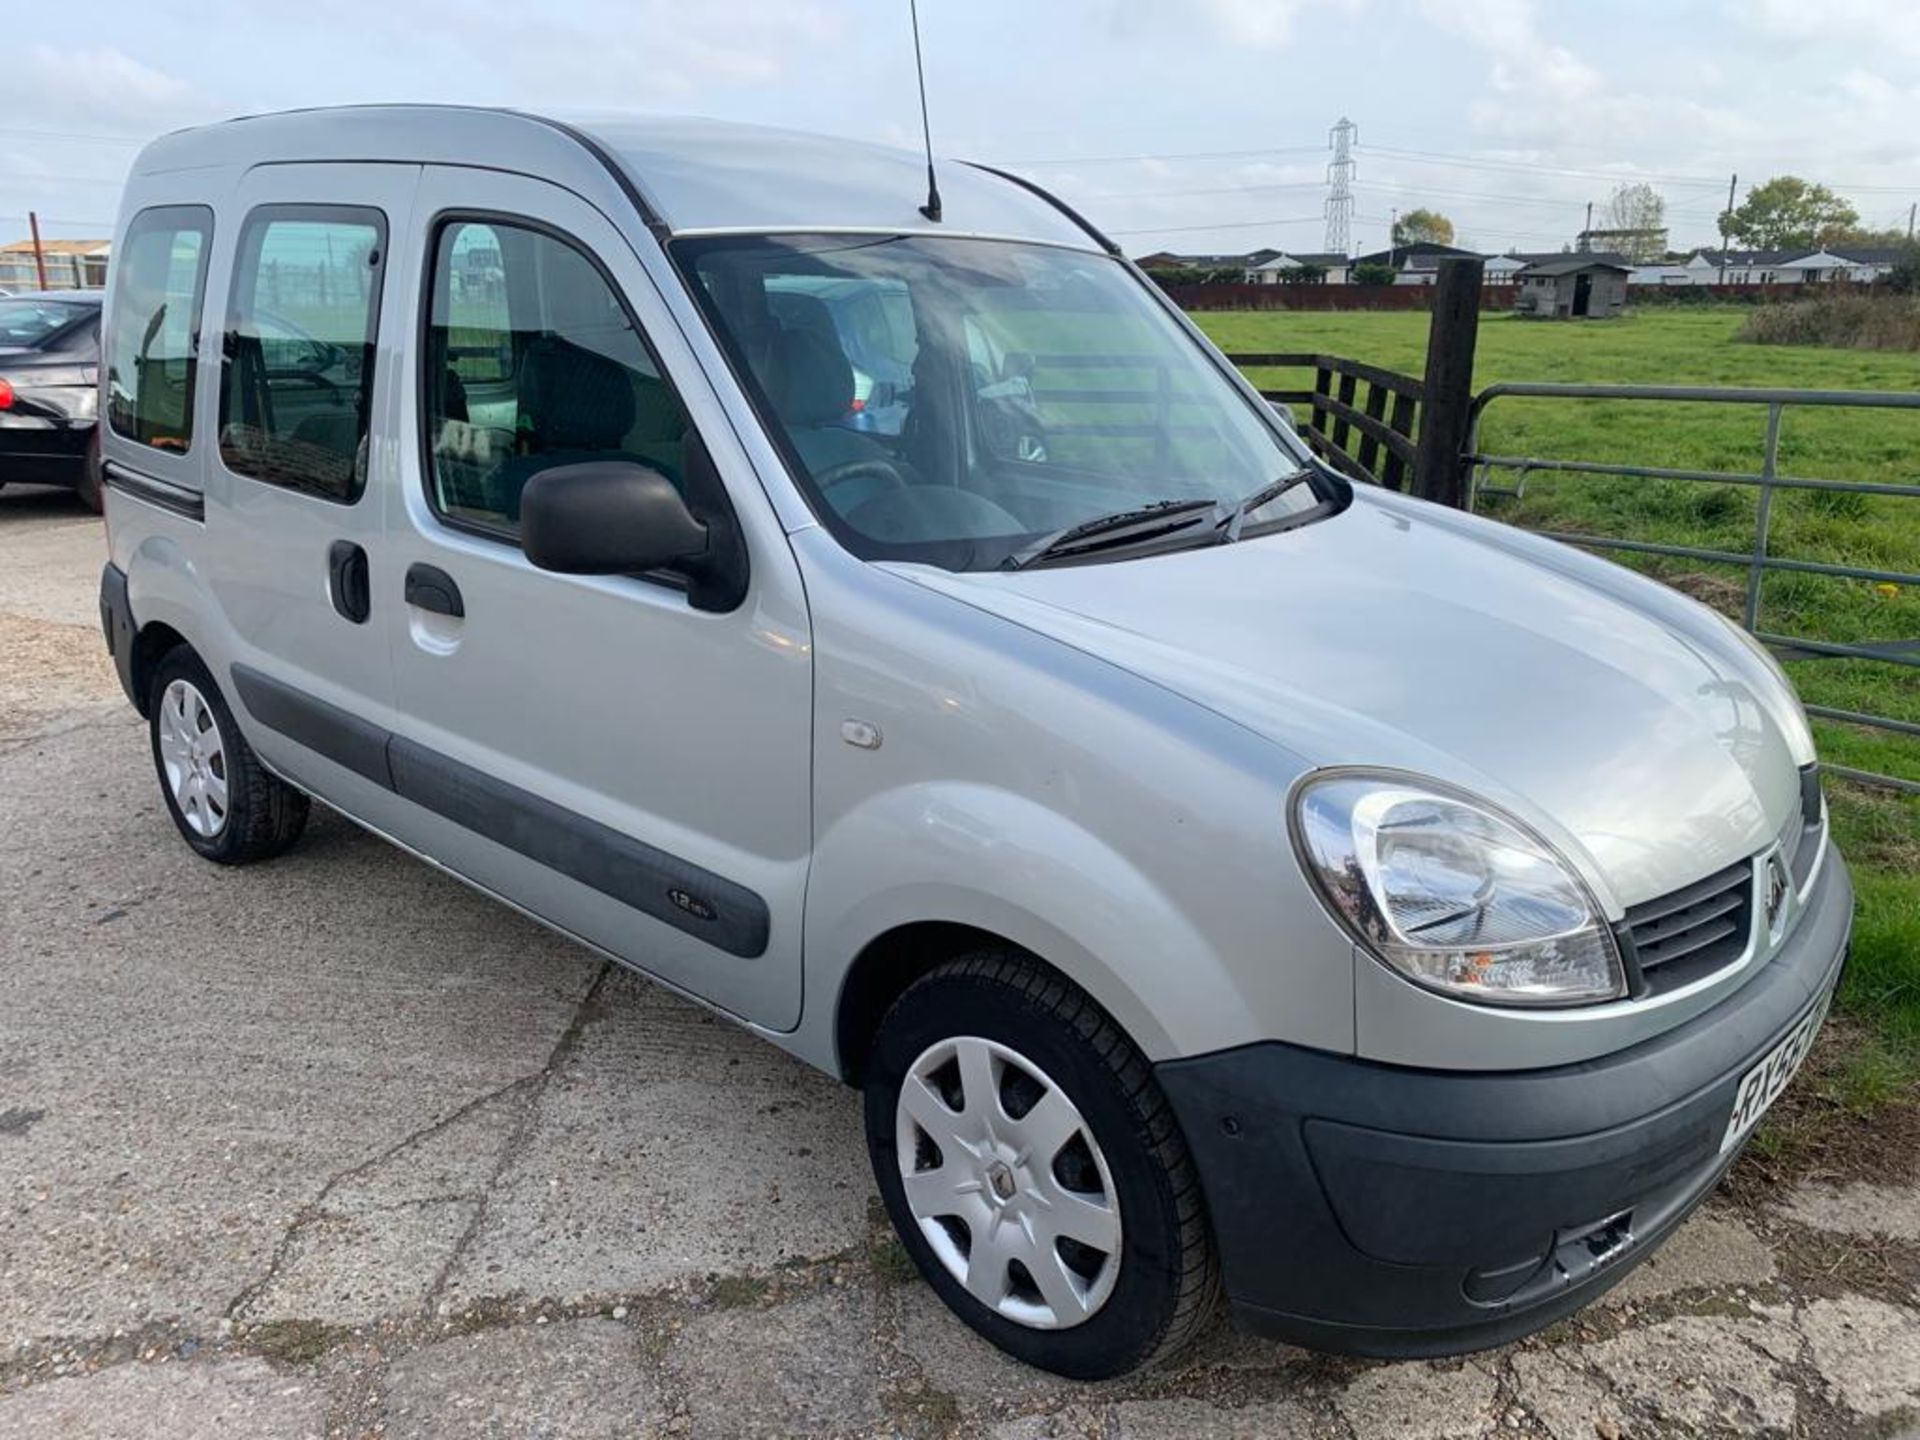 Renault Kangoo Authentique panel van, registration number RX56RVY, first registered 27/02/2007 with